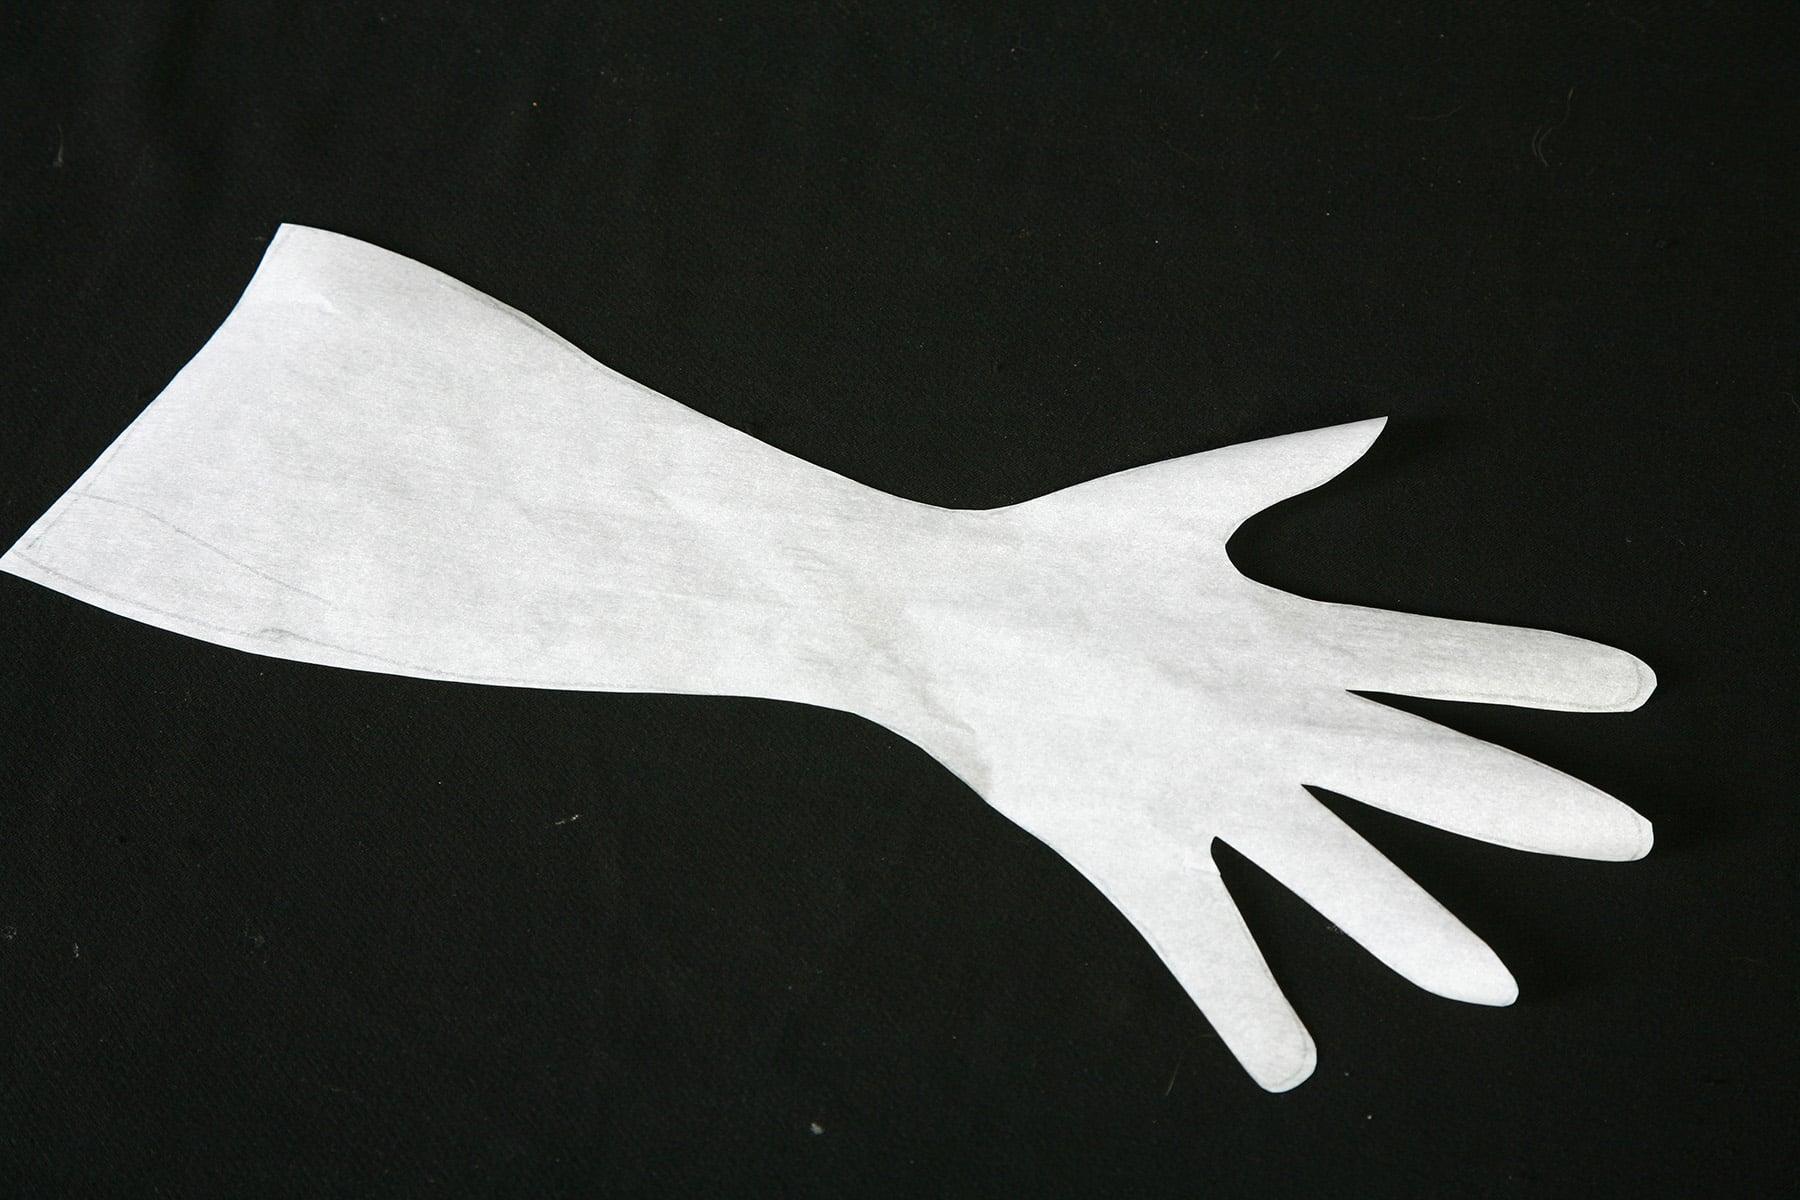 A spandex glove pattern that has been cut out of translucent paper, on a black background.